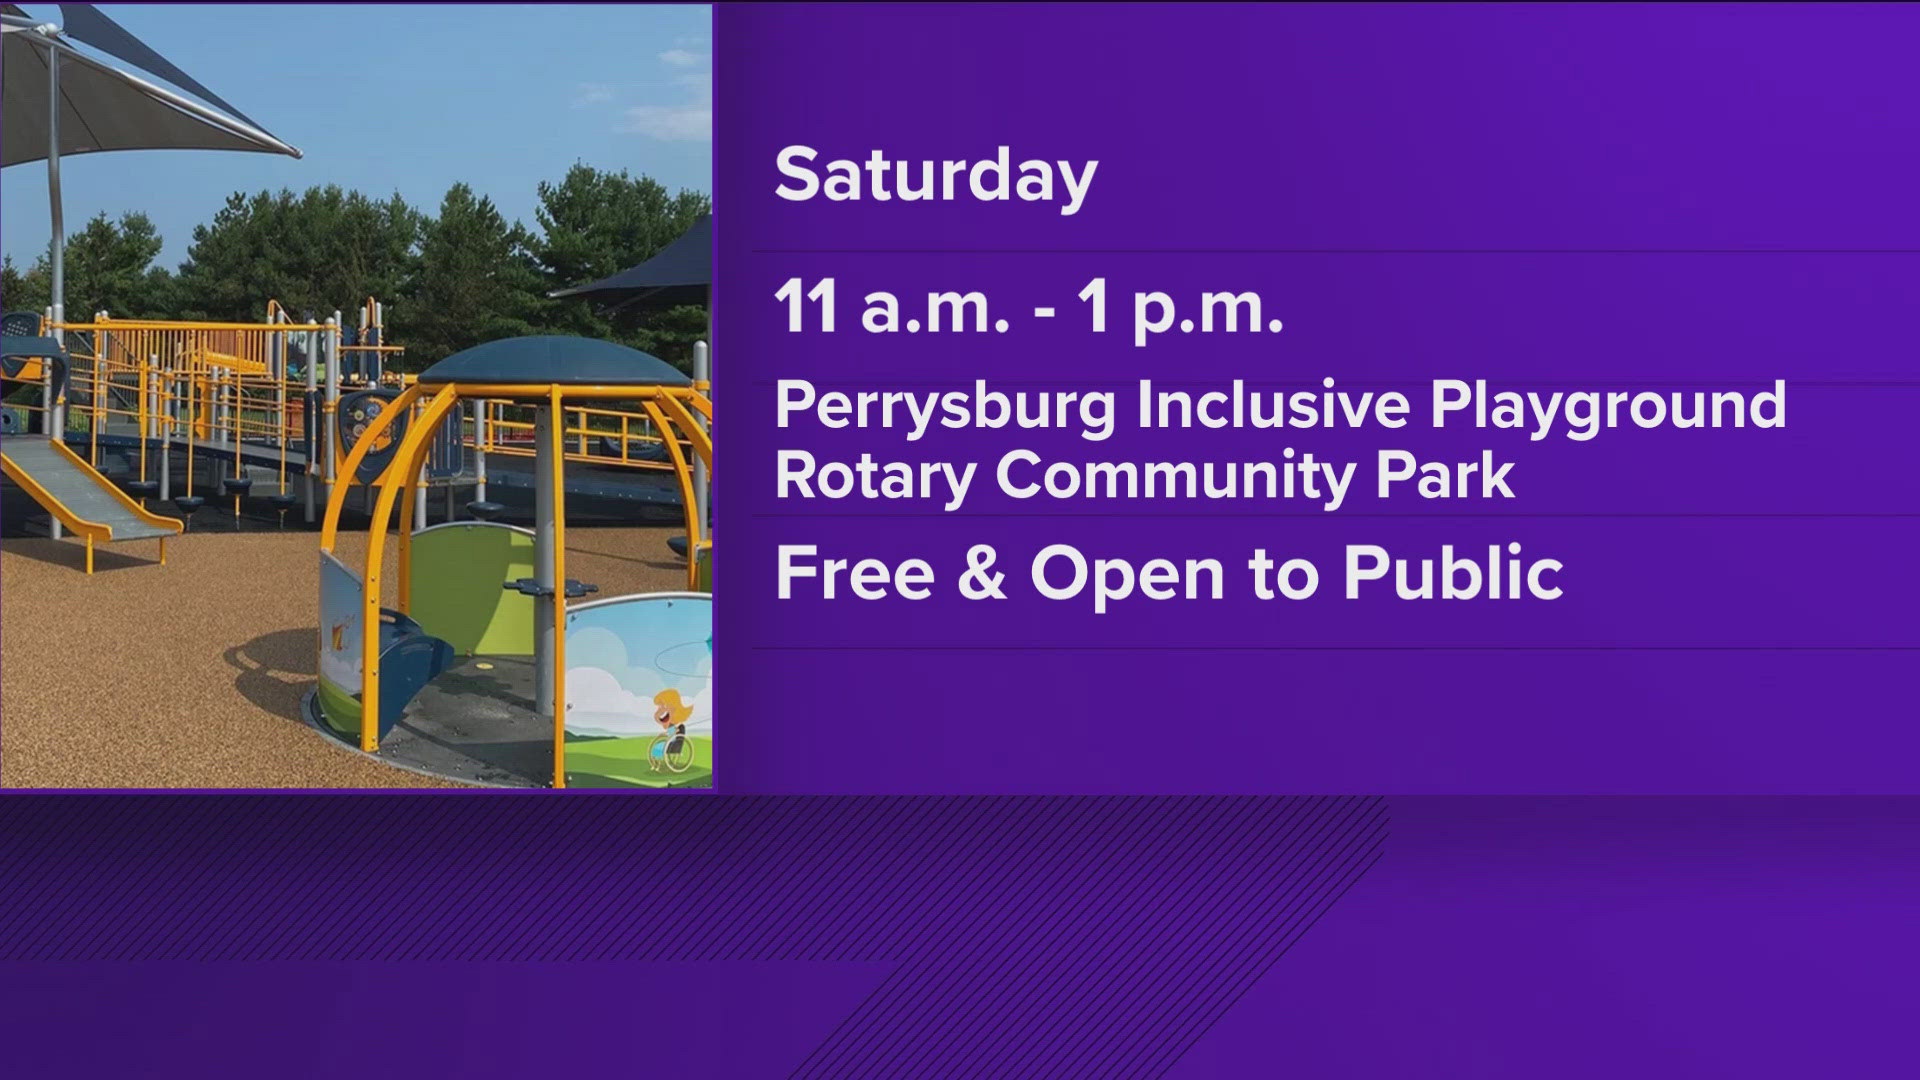 The free event goes from 11 a.m. to 1 p.m. and is open to the public.